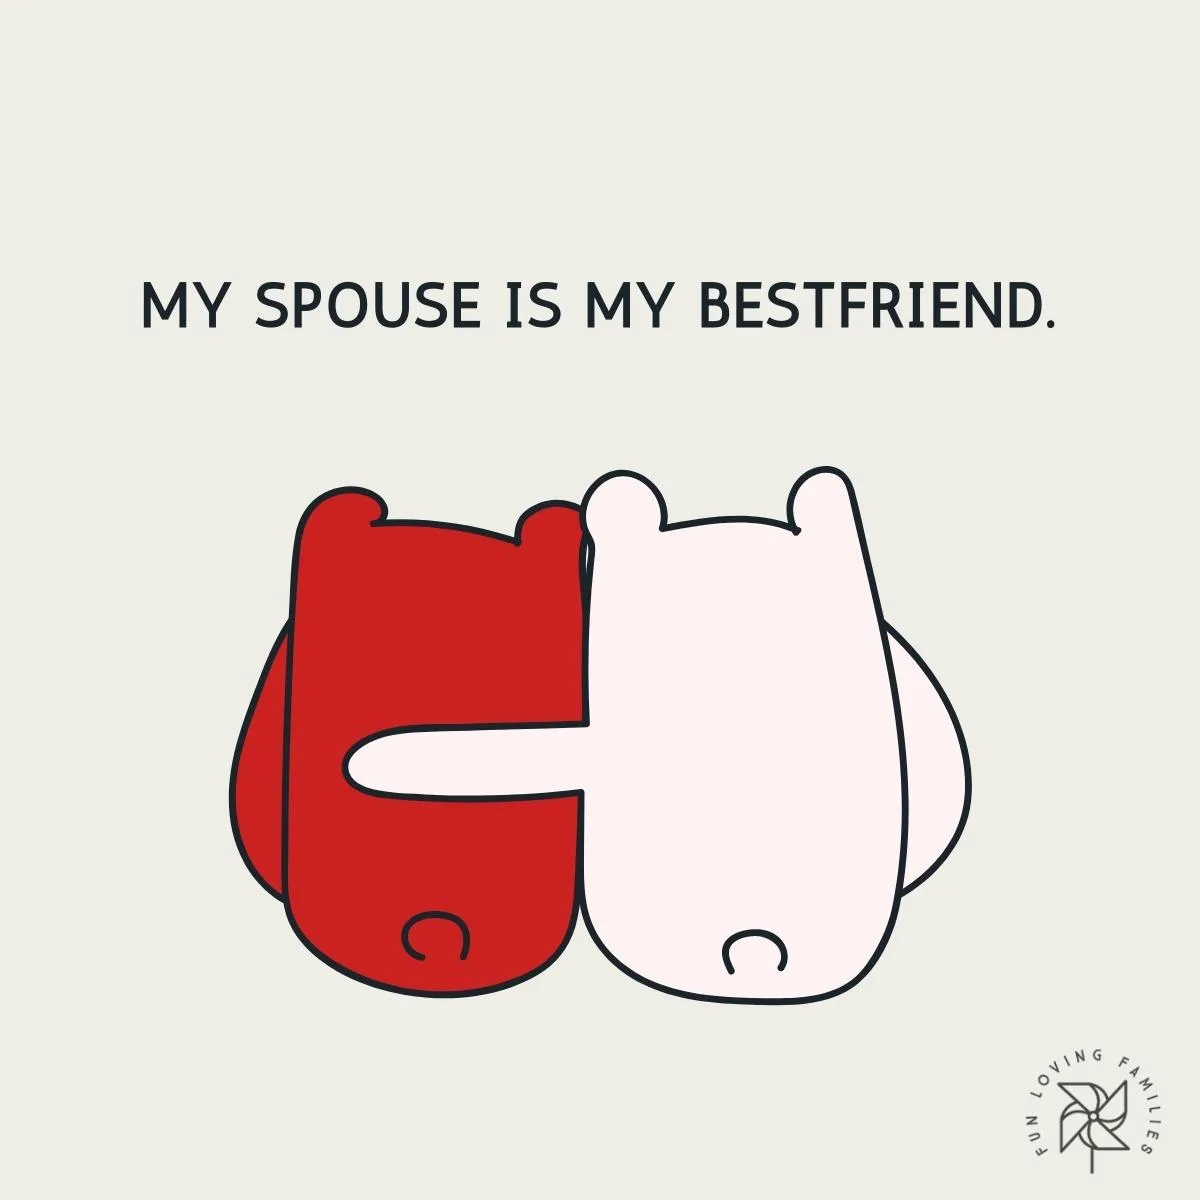 My spouse is my best friend affirmation